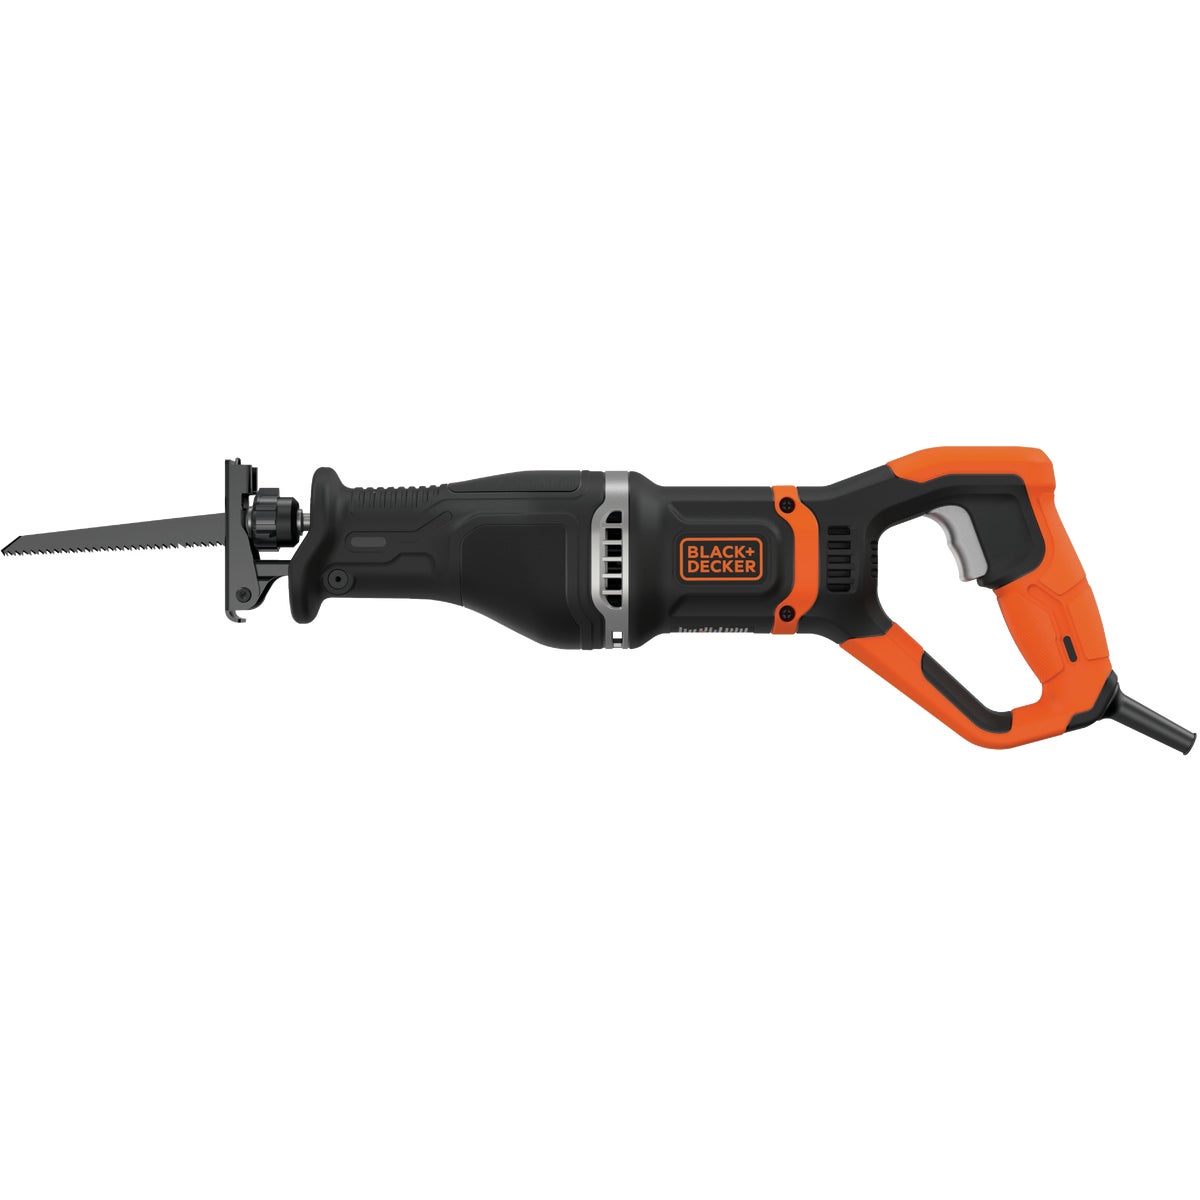 Black & Decker 7-Amp Reciprocating Saw with Removeable Branch Holder